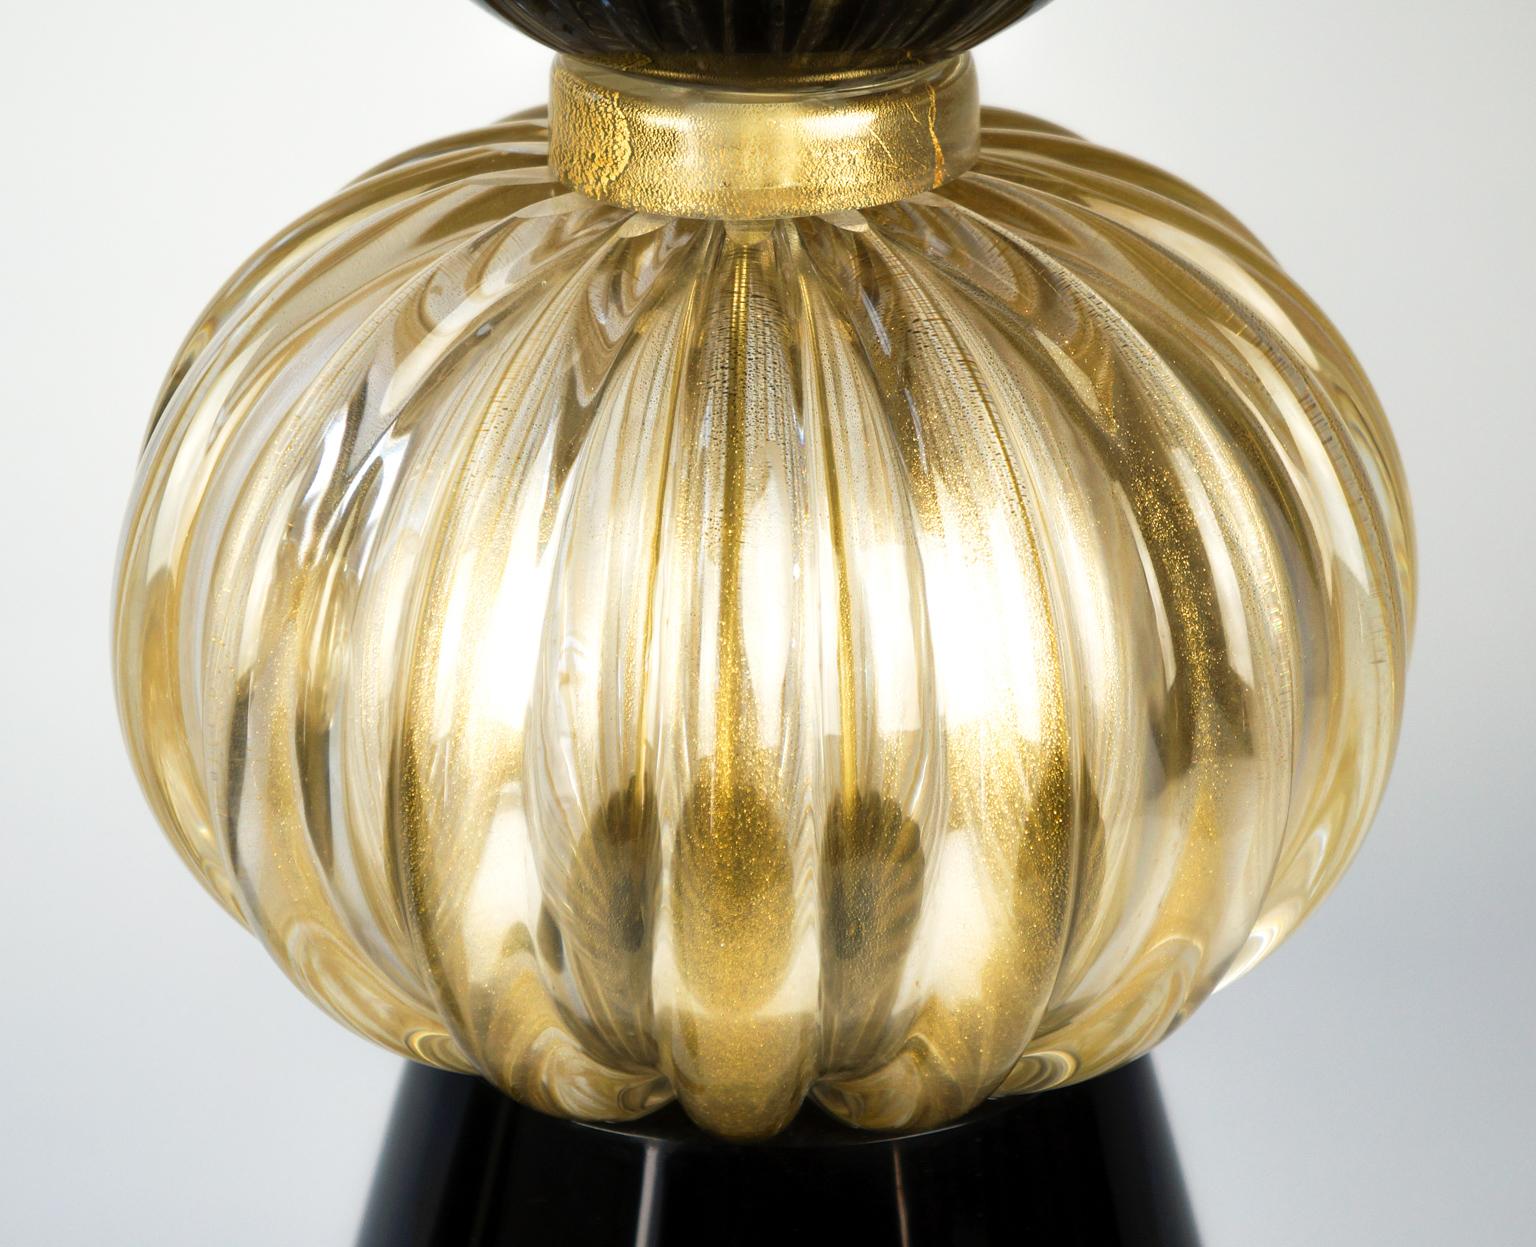 Donà Furnace Mid-Century Modern Black Gold Two of Murano Glass Table Lamps, 1985 For Sale 2